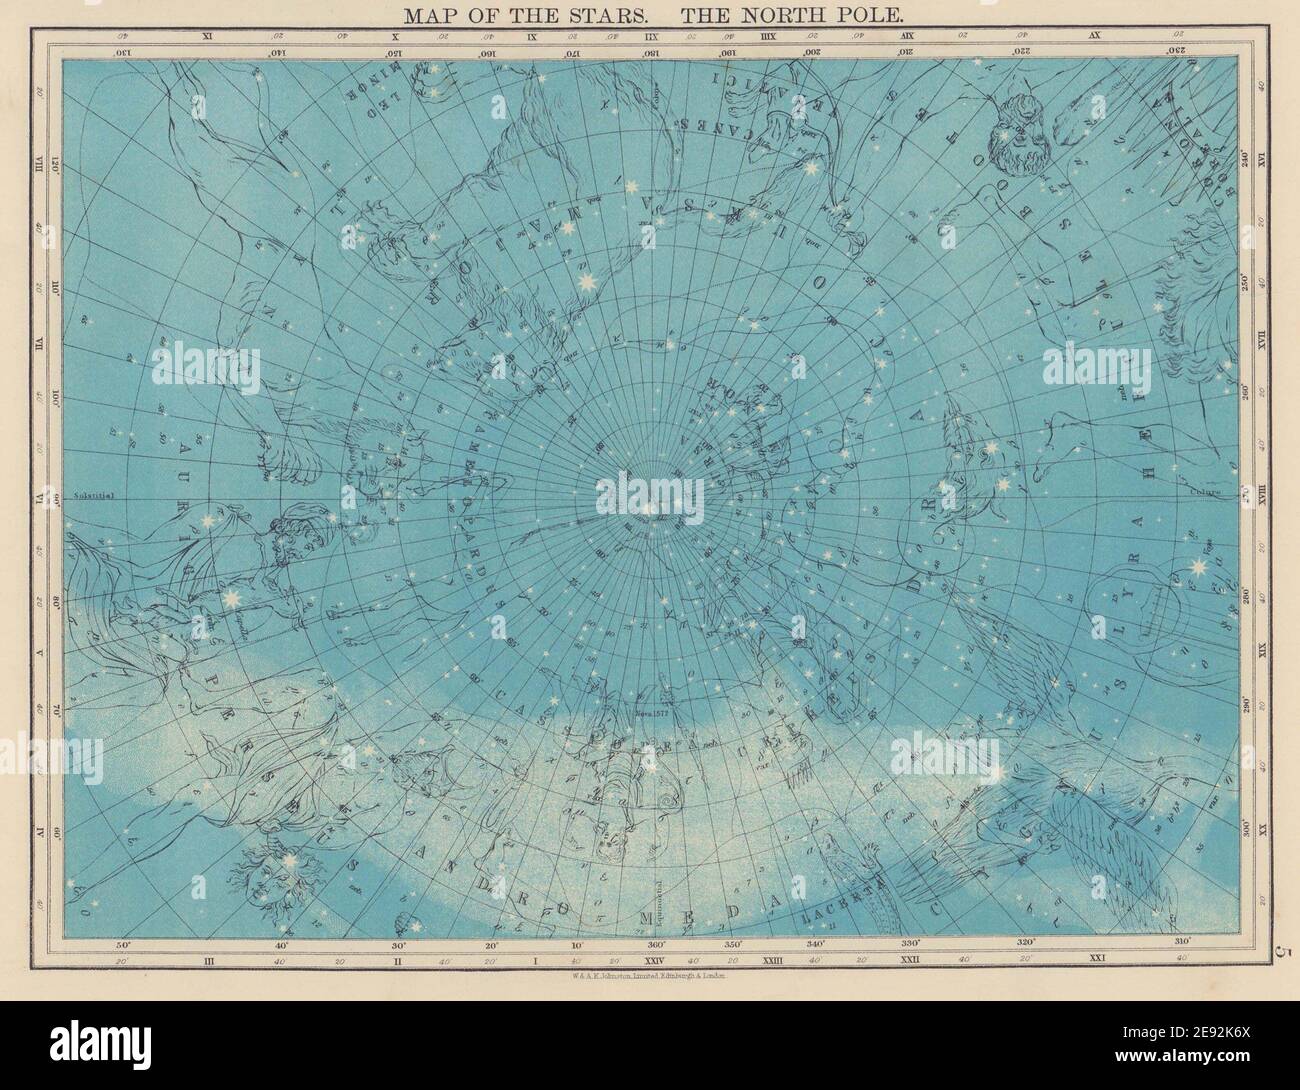 ASTRONOMY. Map of the Stars. The North Pole. Constellations. JOHNSTON 1901 Stock Photo